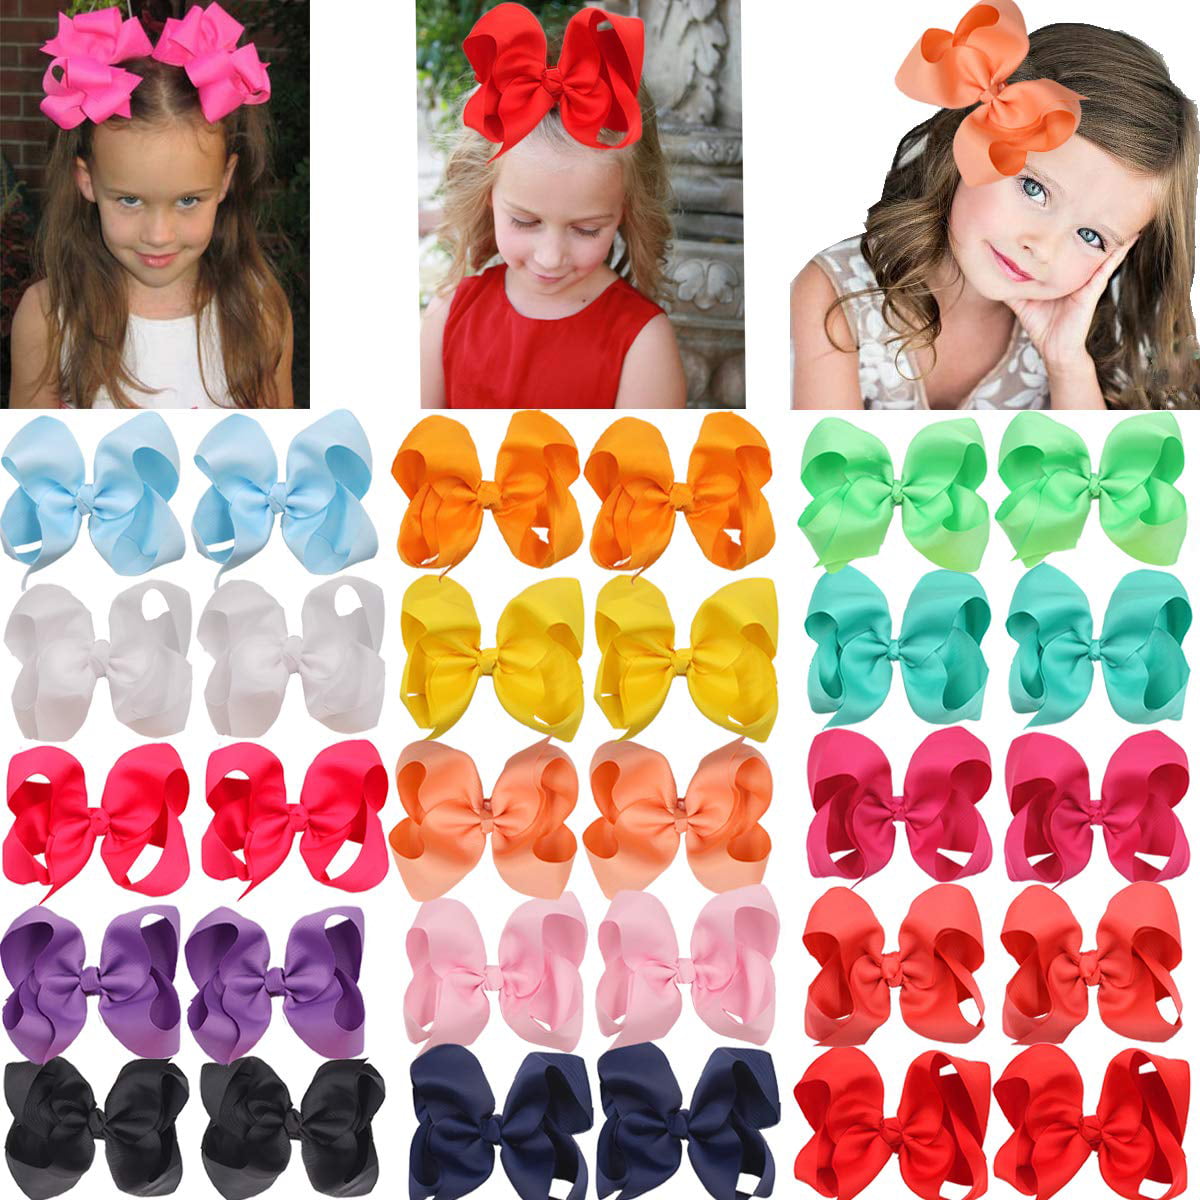 Girls' hair accessories size 4-6 months, compare prices and buy online